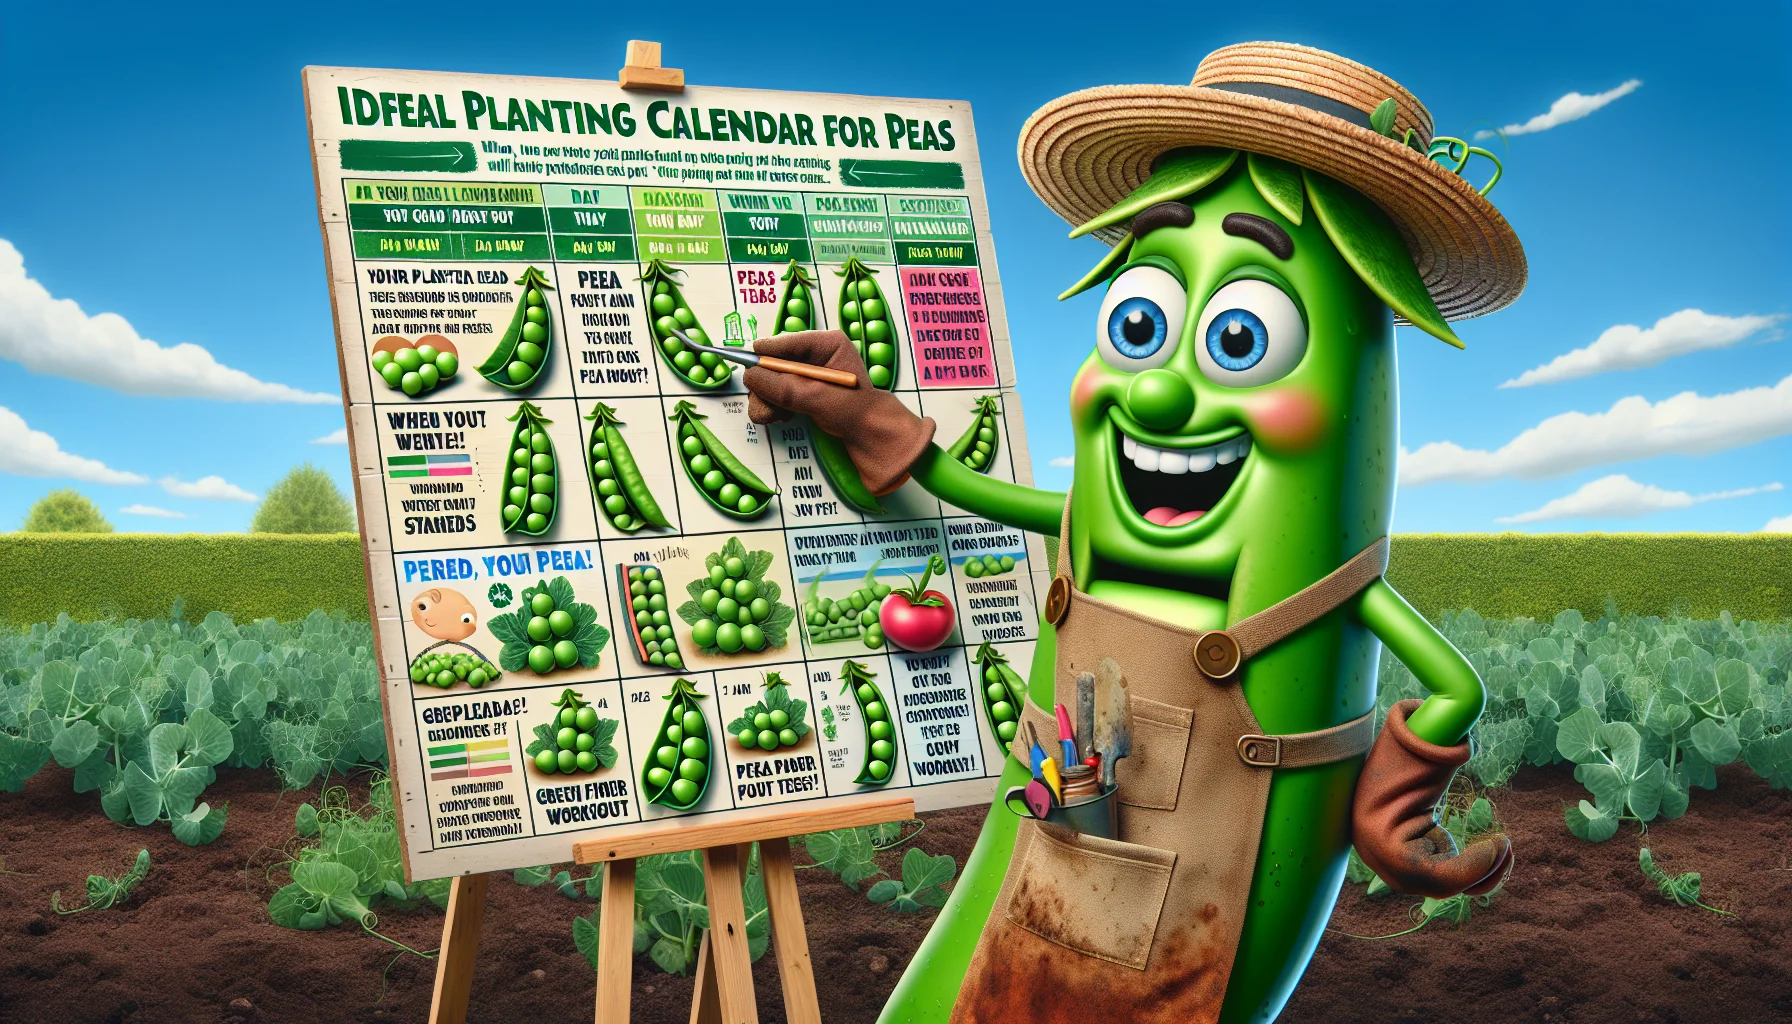 Generate a humorous and realistic image of an animated English pea character enthusiastically demonstrating an ideal planting calendar for peas. It's dressed in typical gardening attire with a straw hat, apron and muddy gloves. In its hands, it's holding a huge vibrant tutorial chart. The chart details clear instructions on when to plant peas, with markers indicating specific months and funny annotations like 'Pea party time!' and 'Green finger workout'. Emphasize the peas' different growing stages to further aid amateur gardeners, with the background featuring a lush home garden landscape under a clear sky.